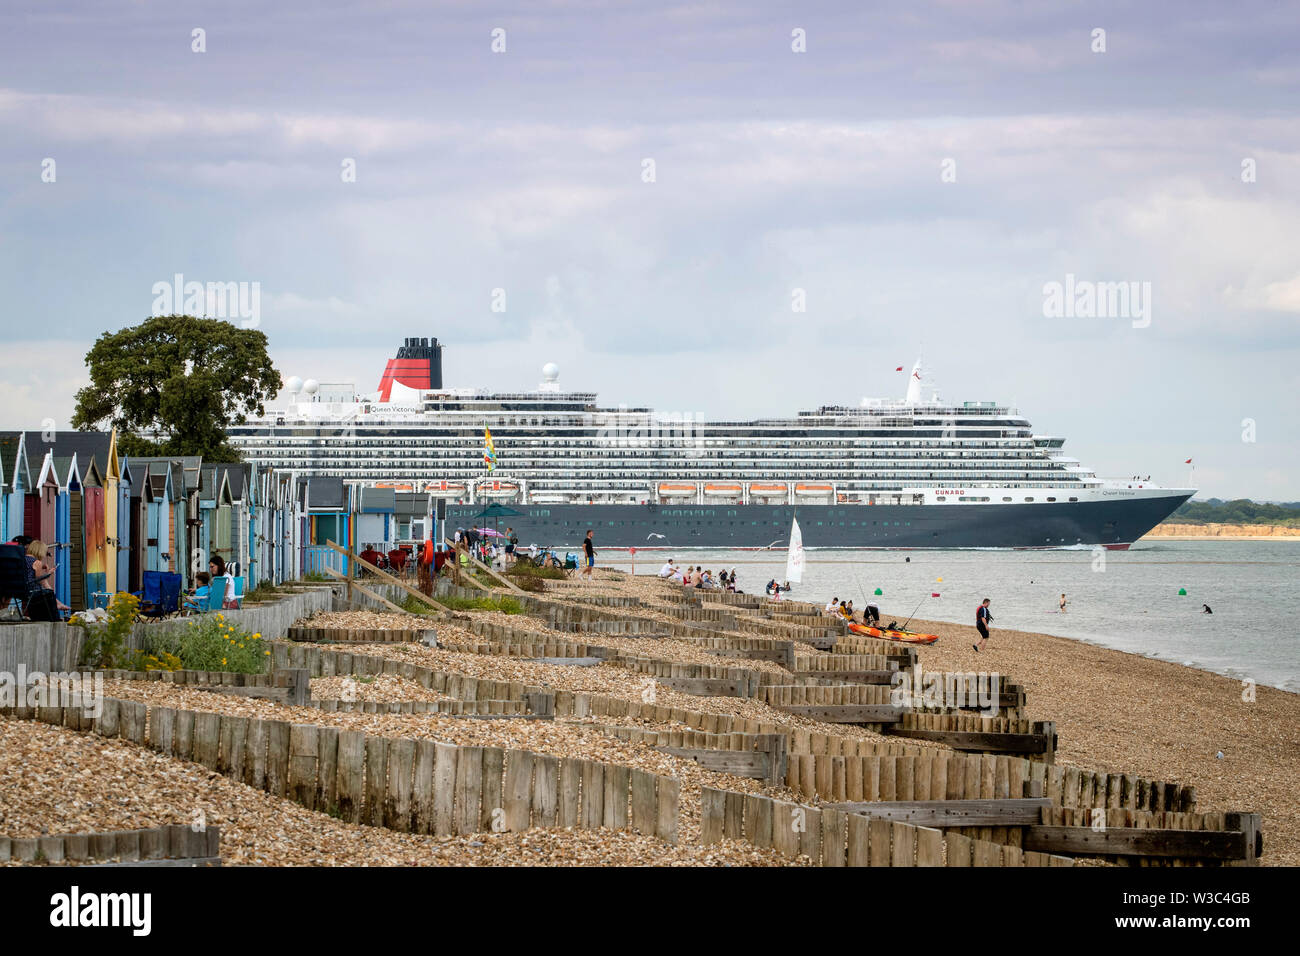 Southampton, Hampshire, UK. 14th July 2019. UK Weather: Beachgoers enjoy a hot summer's evening at Calshot beach in Southampton as cruise ship Queen Victoria passes by. Credit: Stuart Martin/Alamy Live News Stock Photo